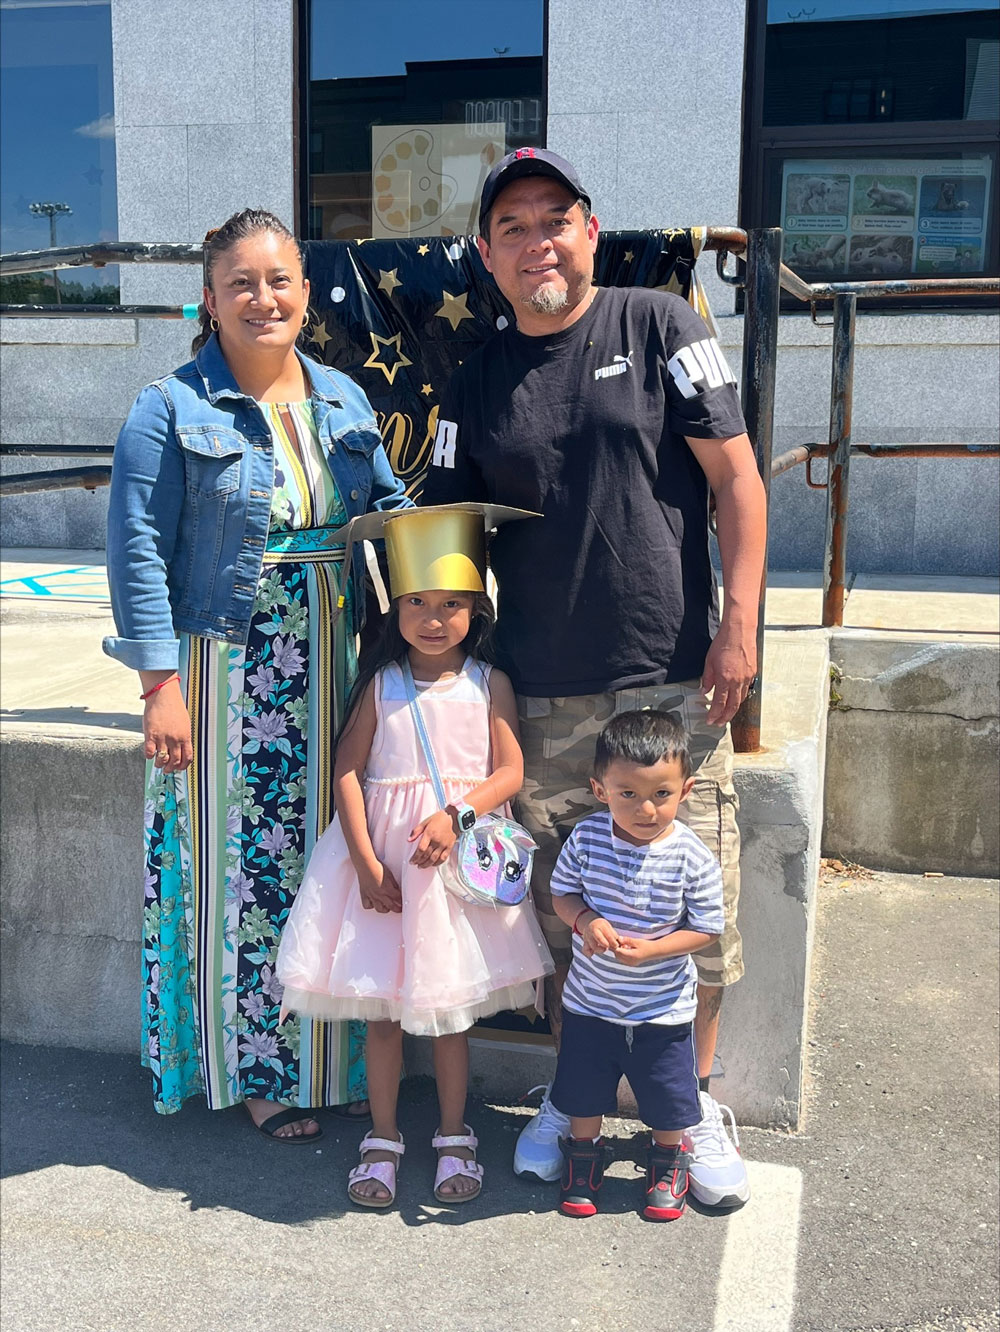 Guadalupe, her husband, and her children at her daughter Sofía's preschool graduation.